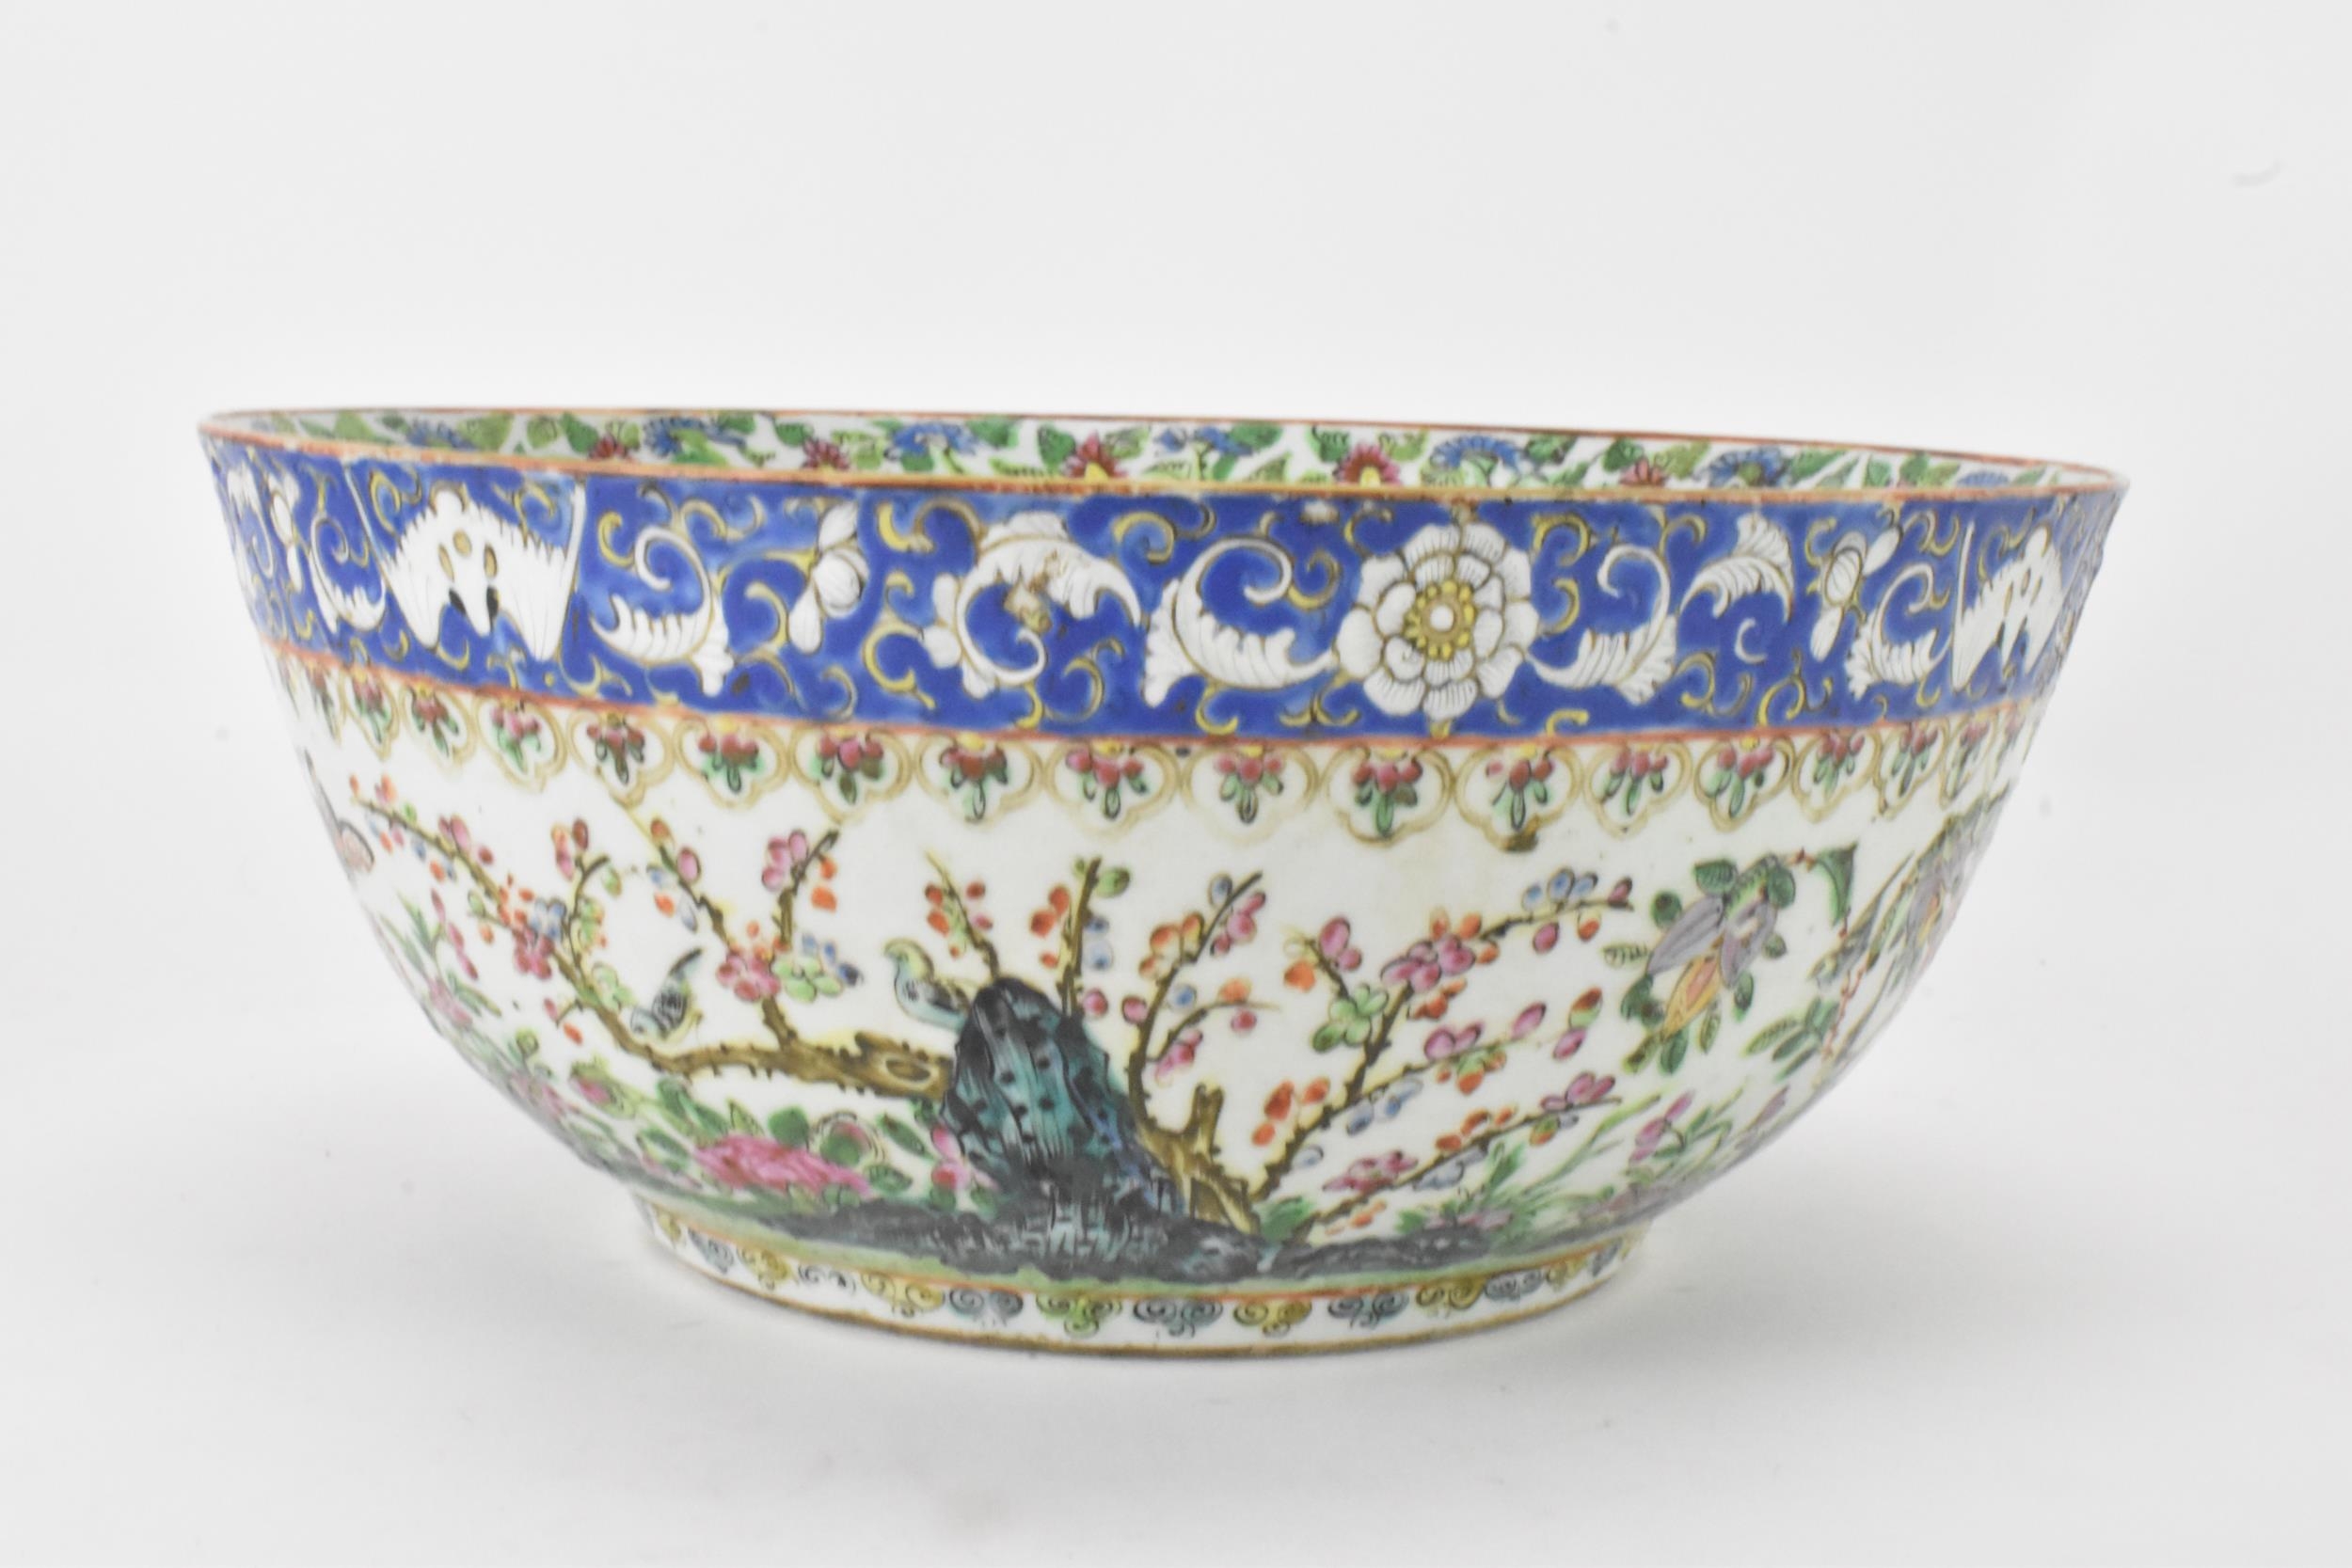 A near pair of Chinese export Canton famille rose punch bowls, Qing dynasty, late 19th century, - Image 10 of 15